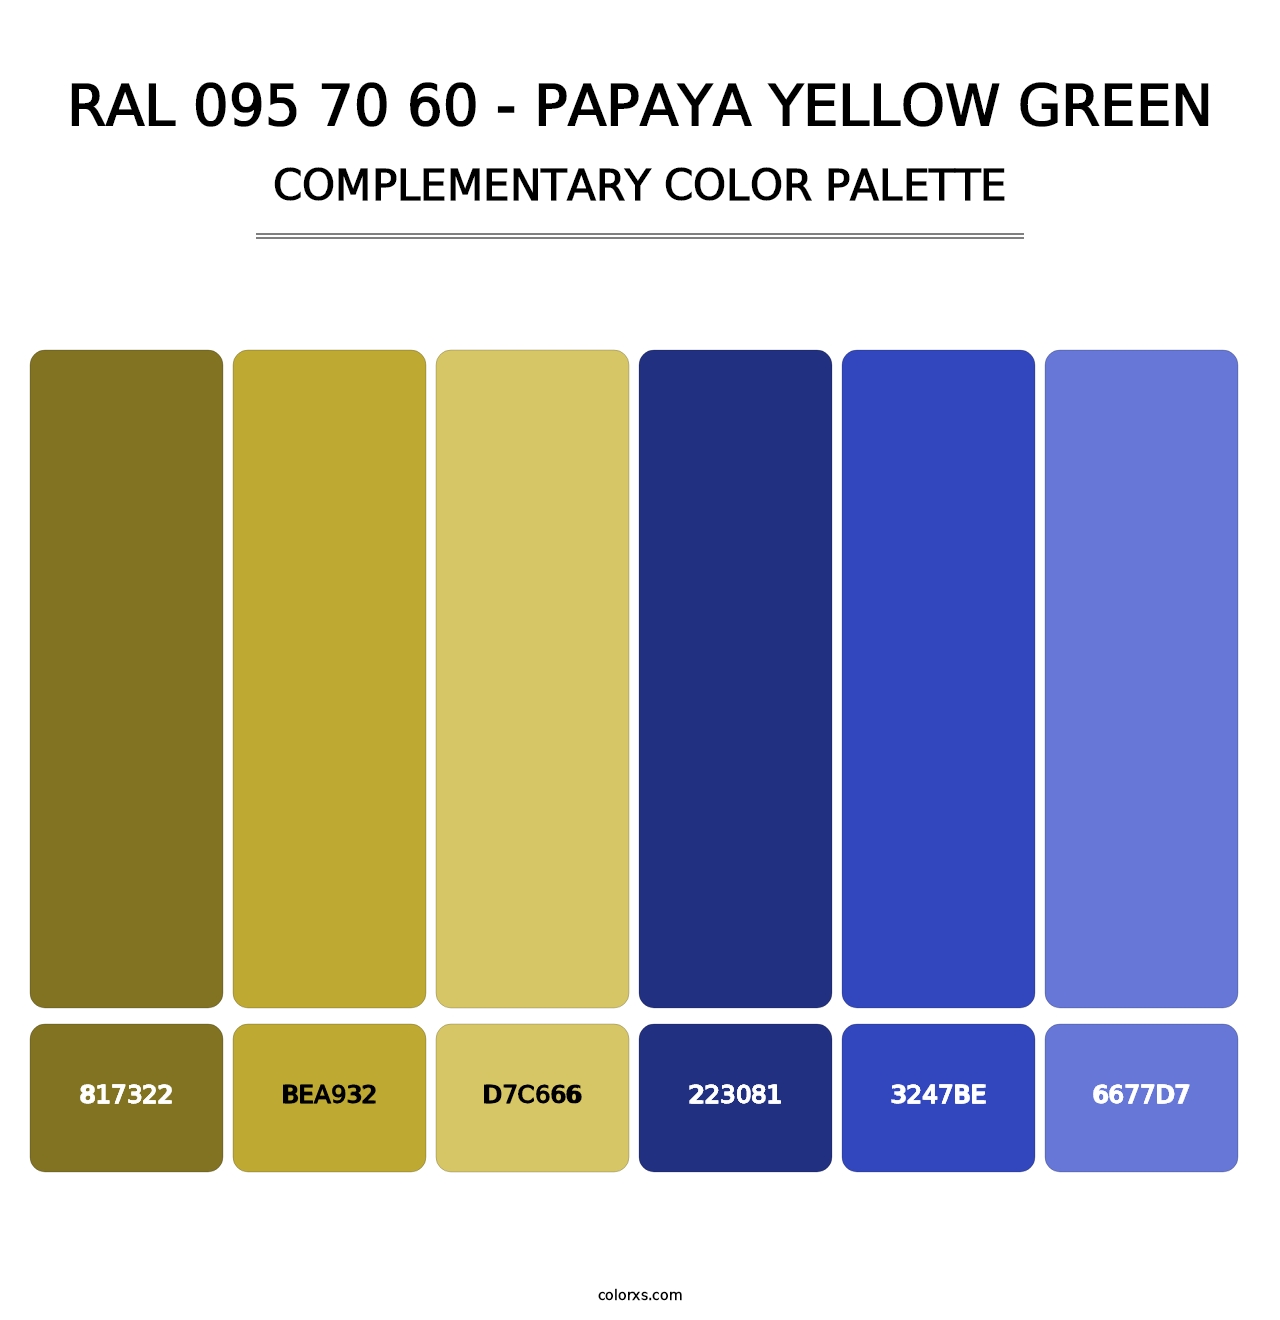 RAL 095 70 60 - Papaya Yellow Green - Complementary Color Palette